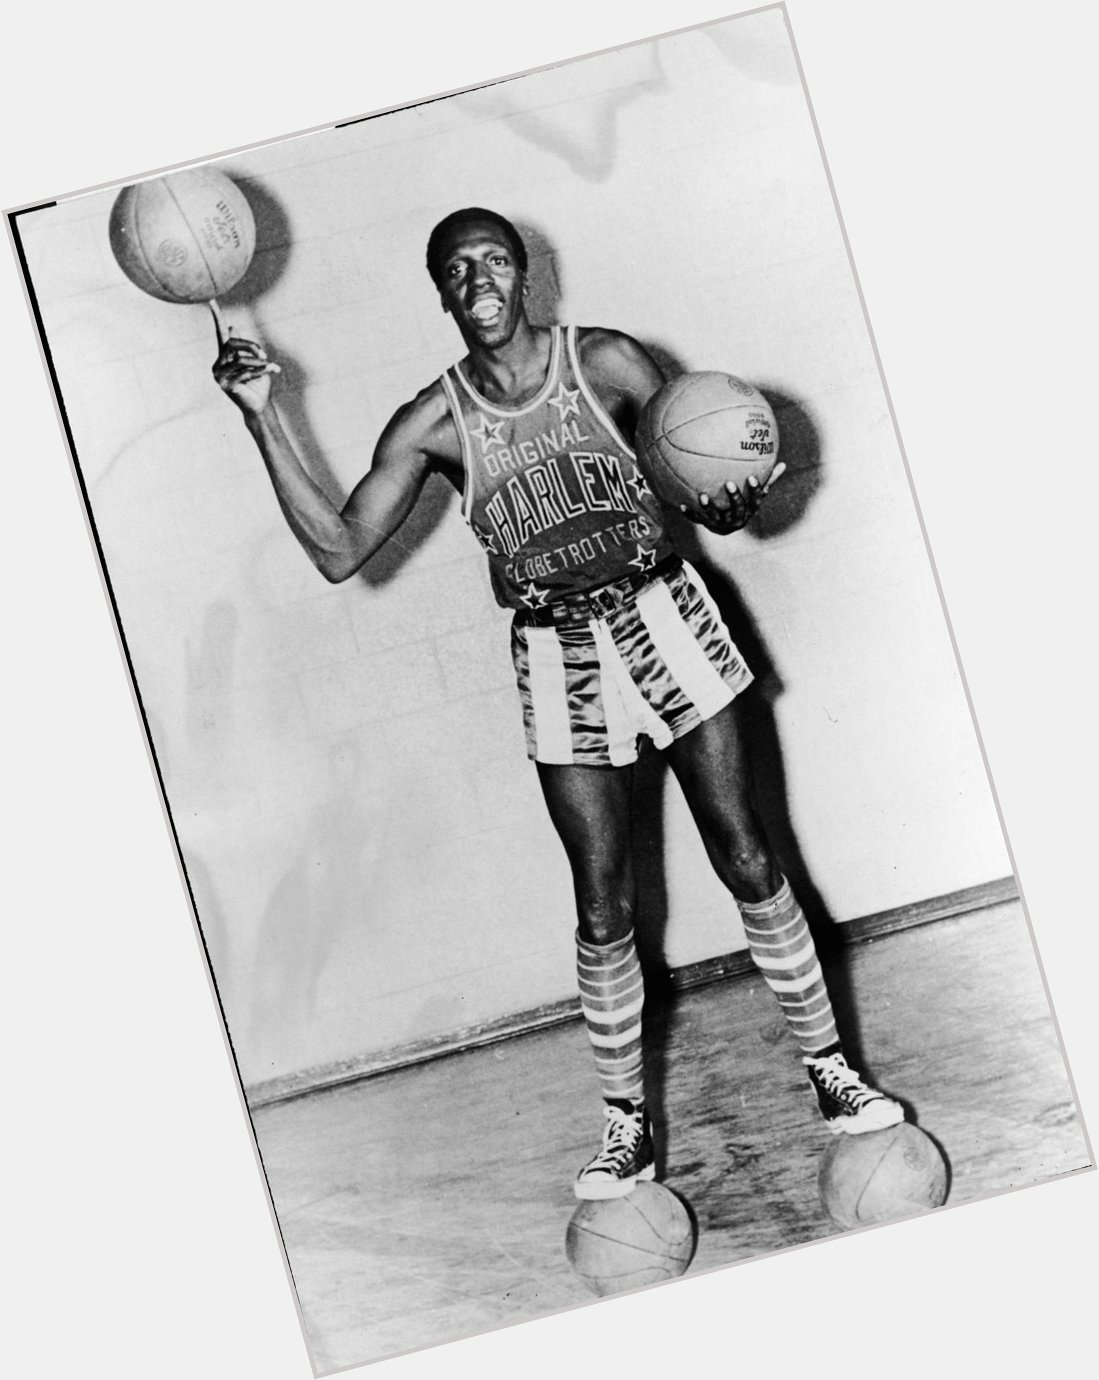 Happy birthday Meadowlark Lemon one of the greatest sports figures of all time 